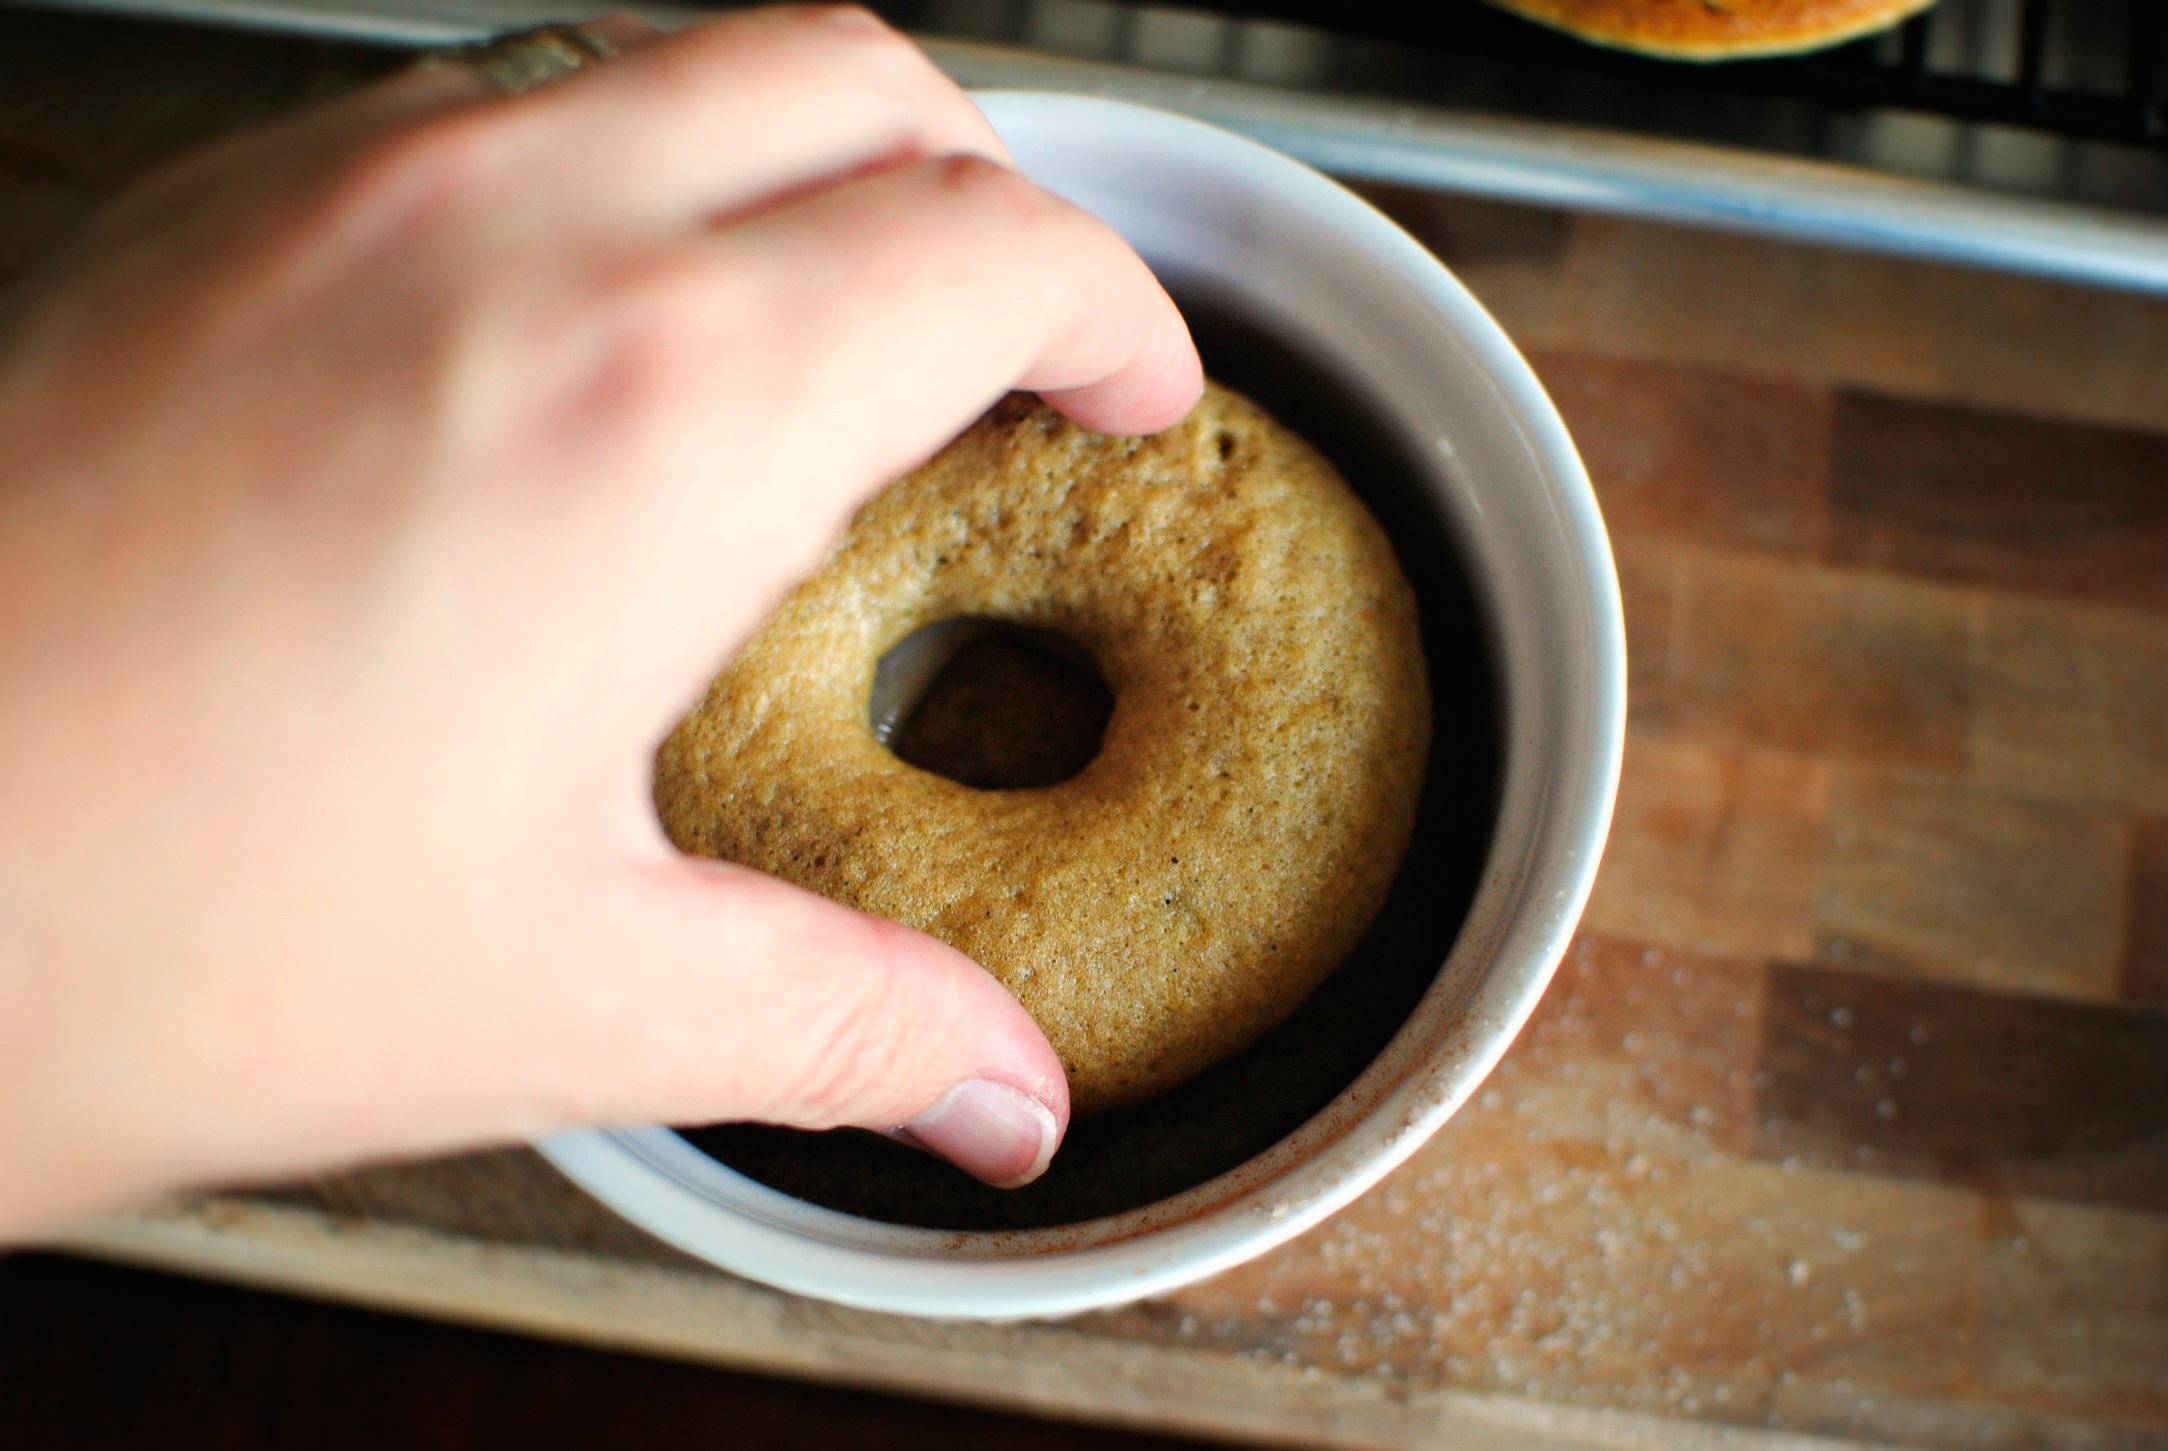 Tasty Kitchen Blog: Apple Cider Donuts. Guest post by Laurie of Simply Scratch, recipe submitted by TK member Aimee of Shugary Sweets.